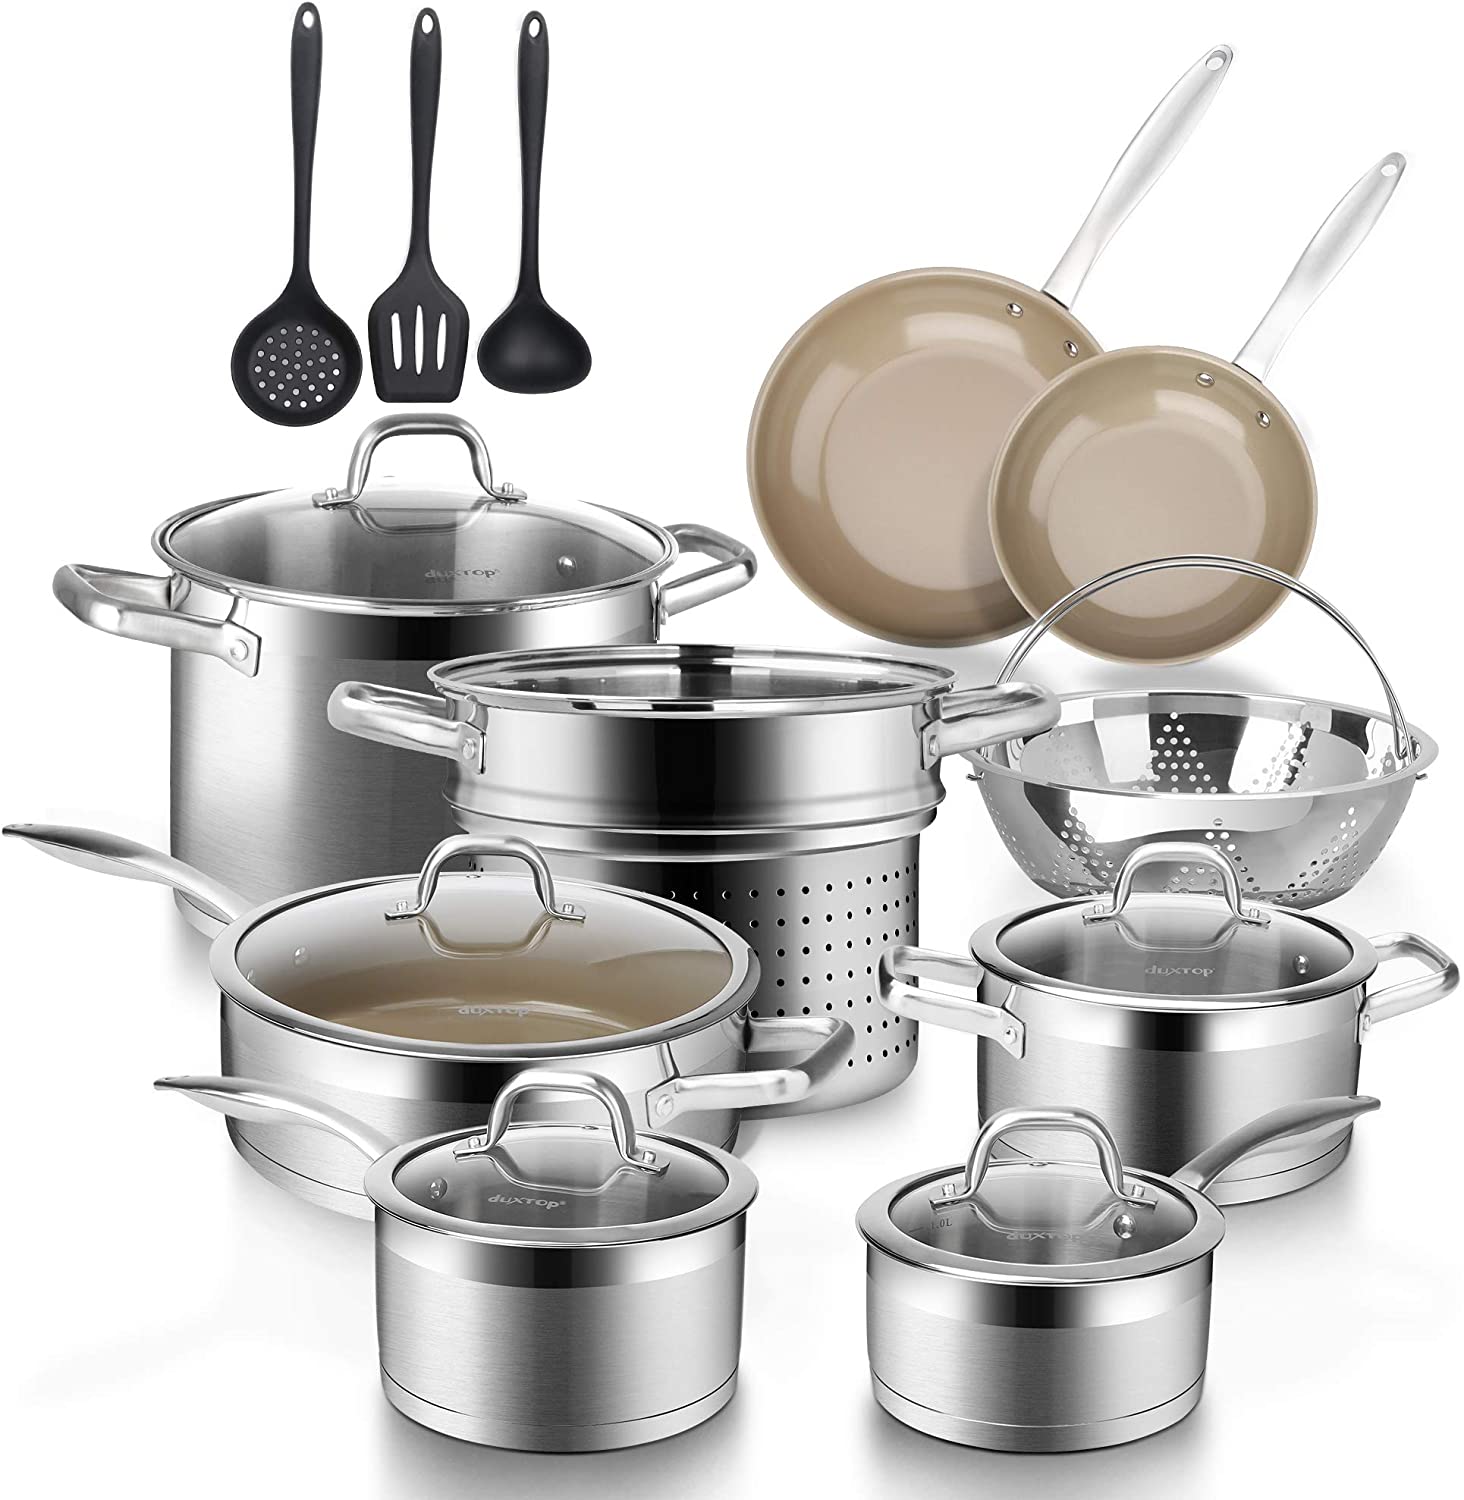 Duxtop Tri-Ply Stainless Steel Induction Cookware Set